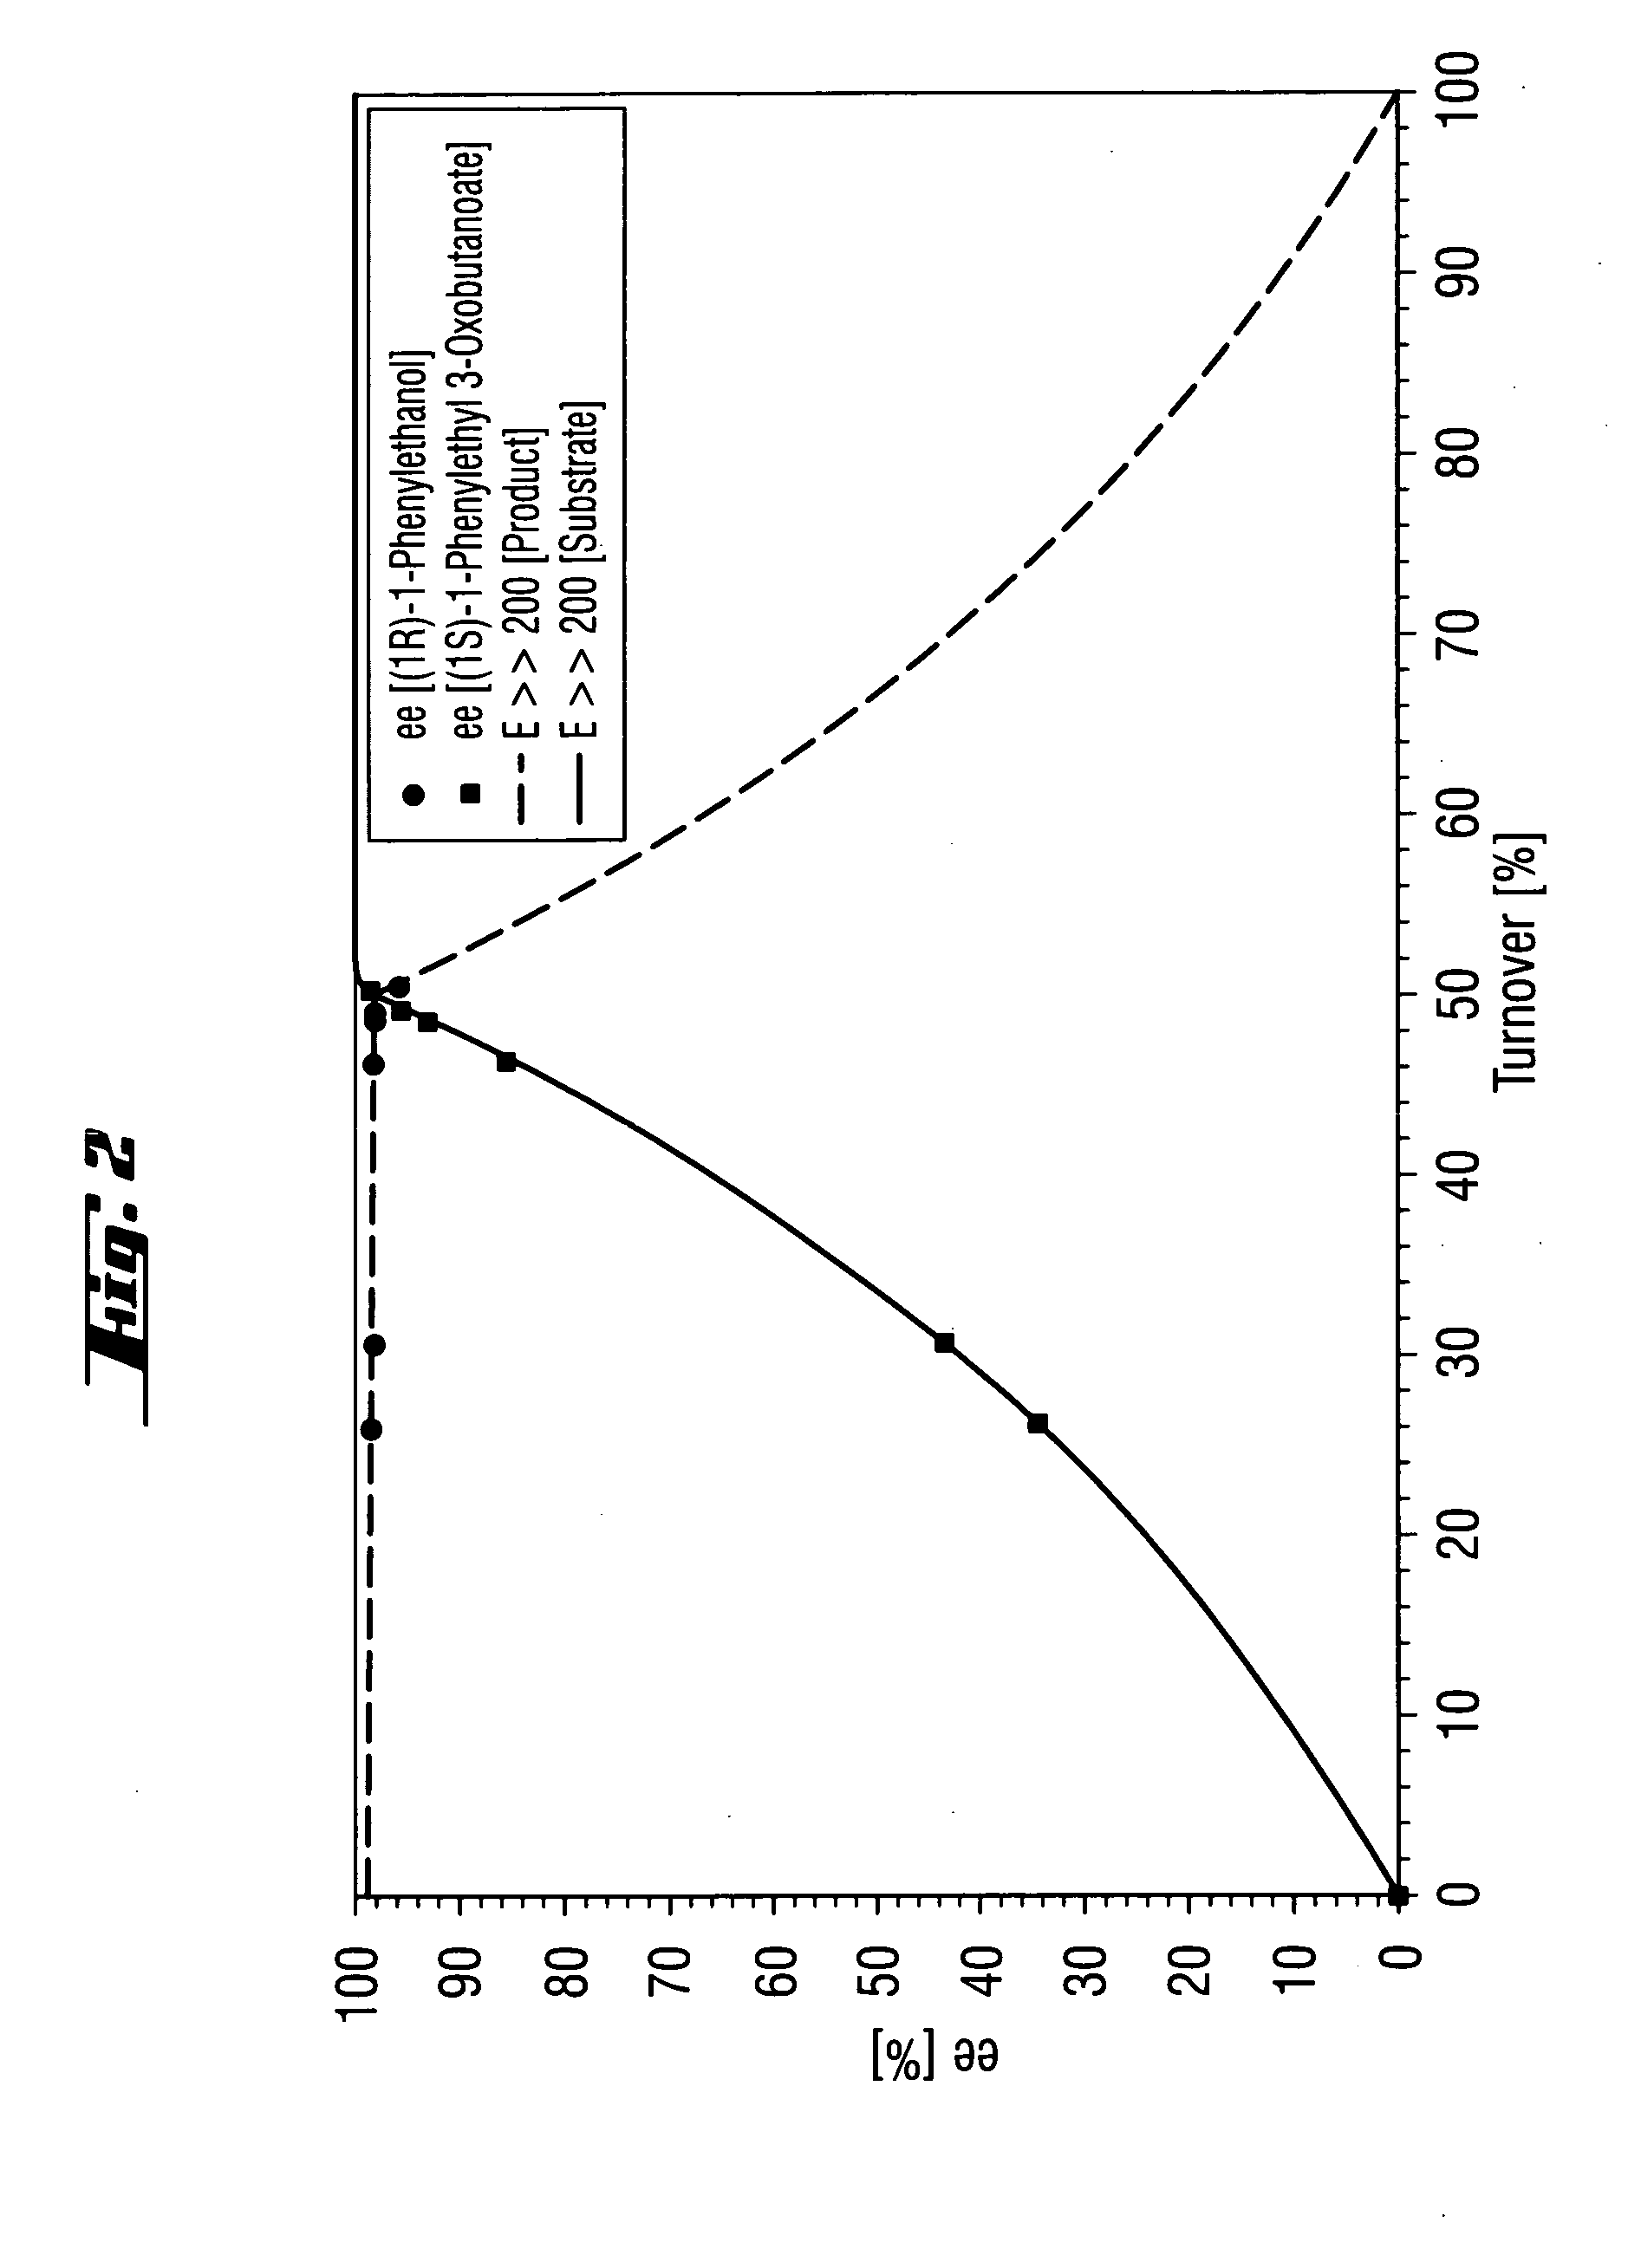 Process for the enantioselective preparation of secondary alcohols by lipase-catalyzed solvolysis of the corresponding acetoacetic esters